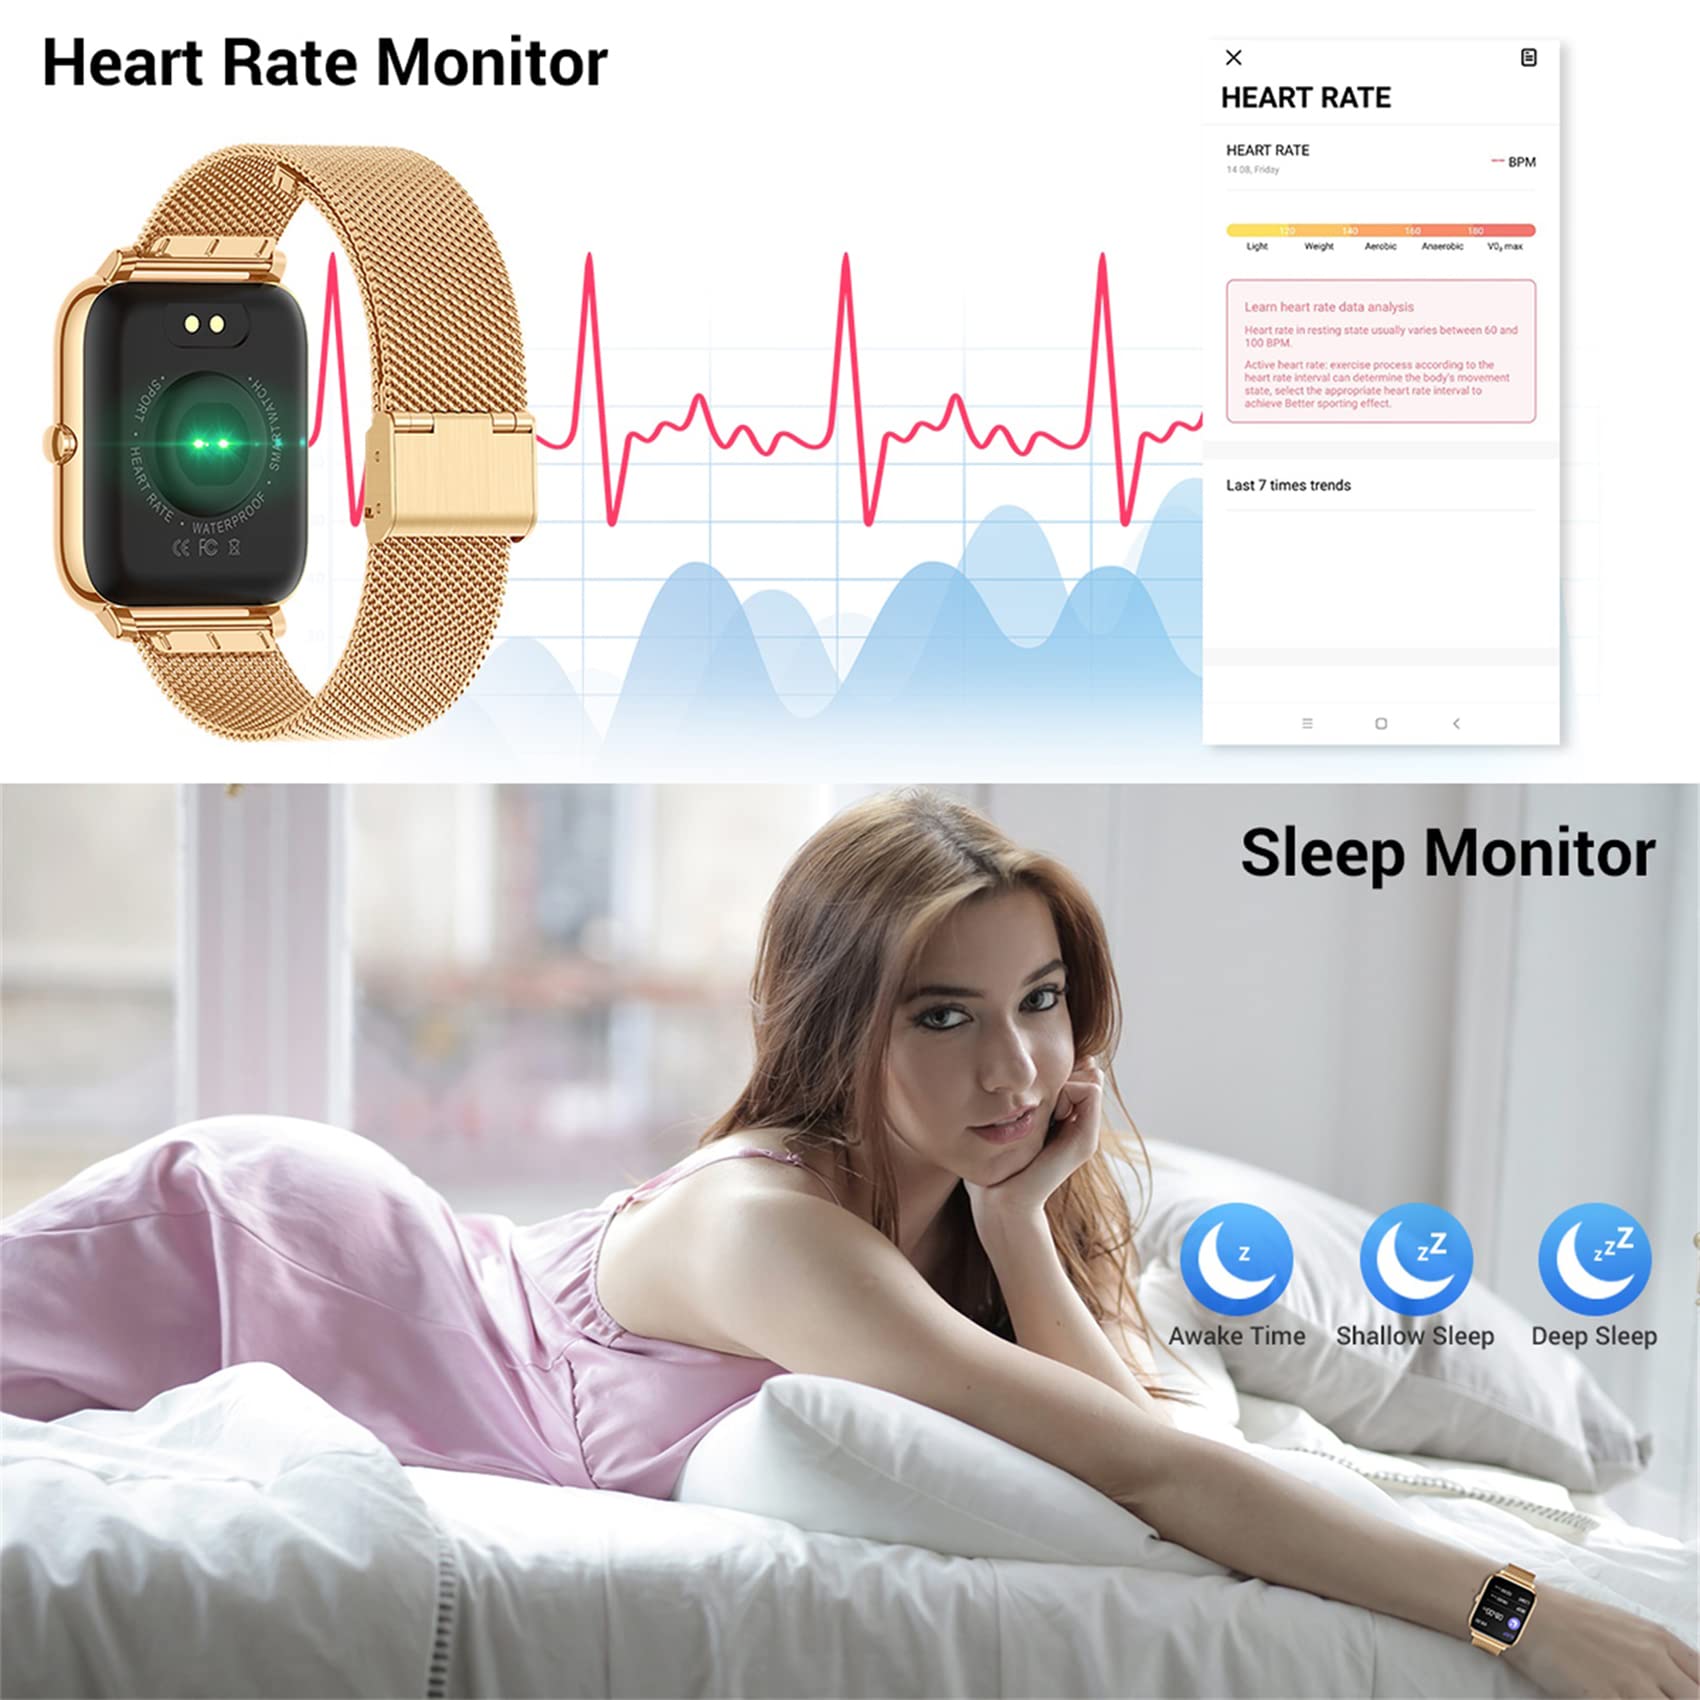 CanMixs Smart Watch for Android Phones iOS Waterproof Smart Watches for Women Men Sports Digital Watch Fitness Tracker Heart Rate Blood Oxygen Sleep Monitor Touch Screen Compatible Samsung iPhone